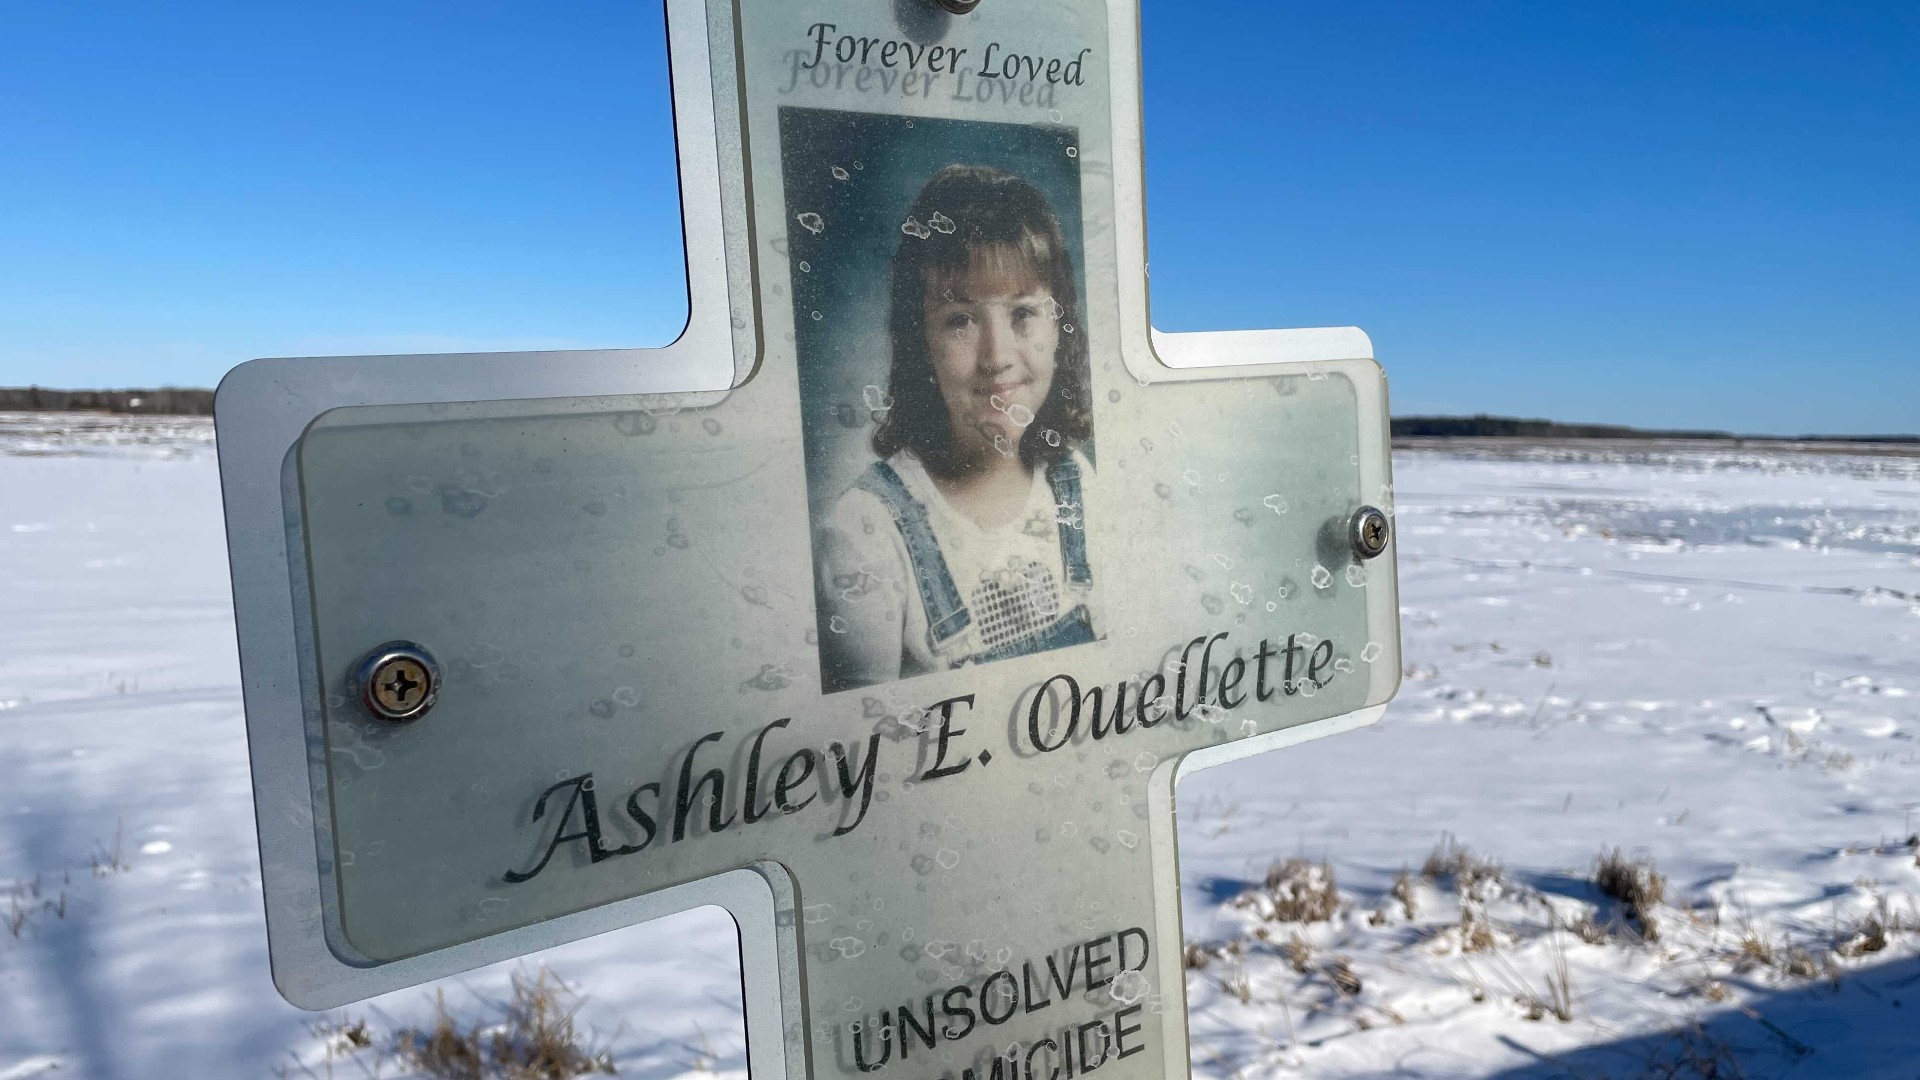 Police said they received roughly four tips in the last two months that they are now investigating. The 15-year-old girl was killed in 1999.